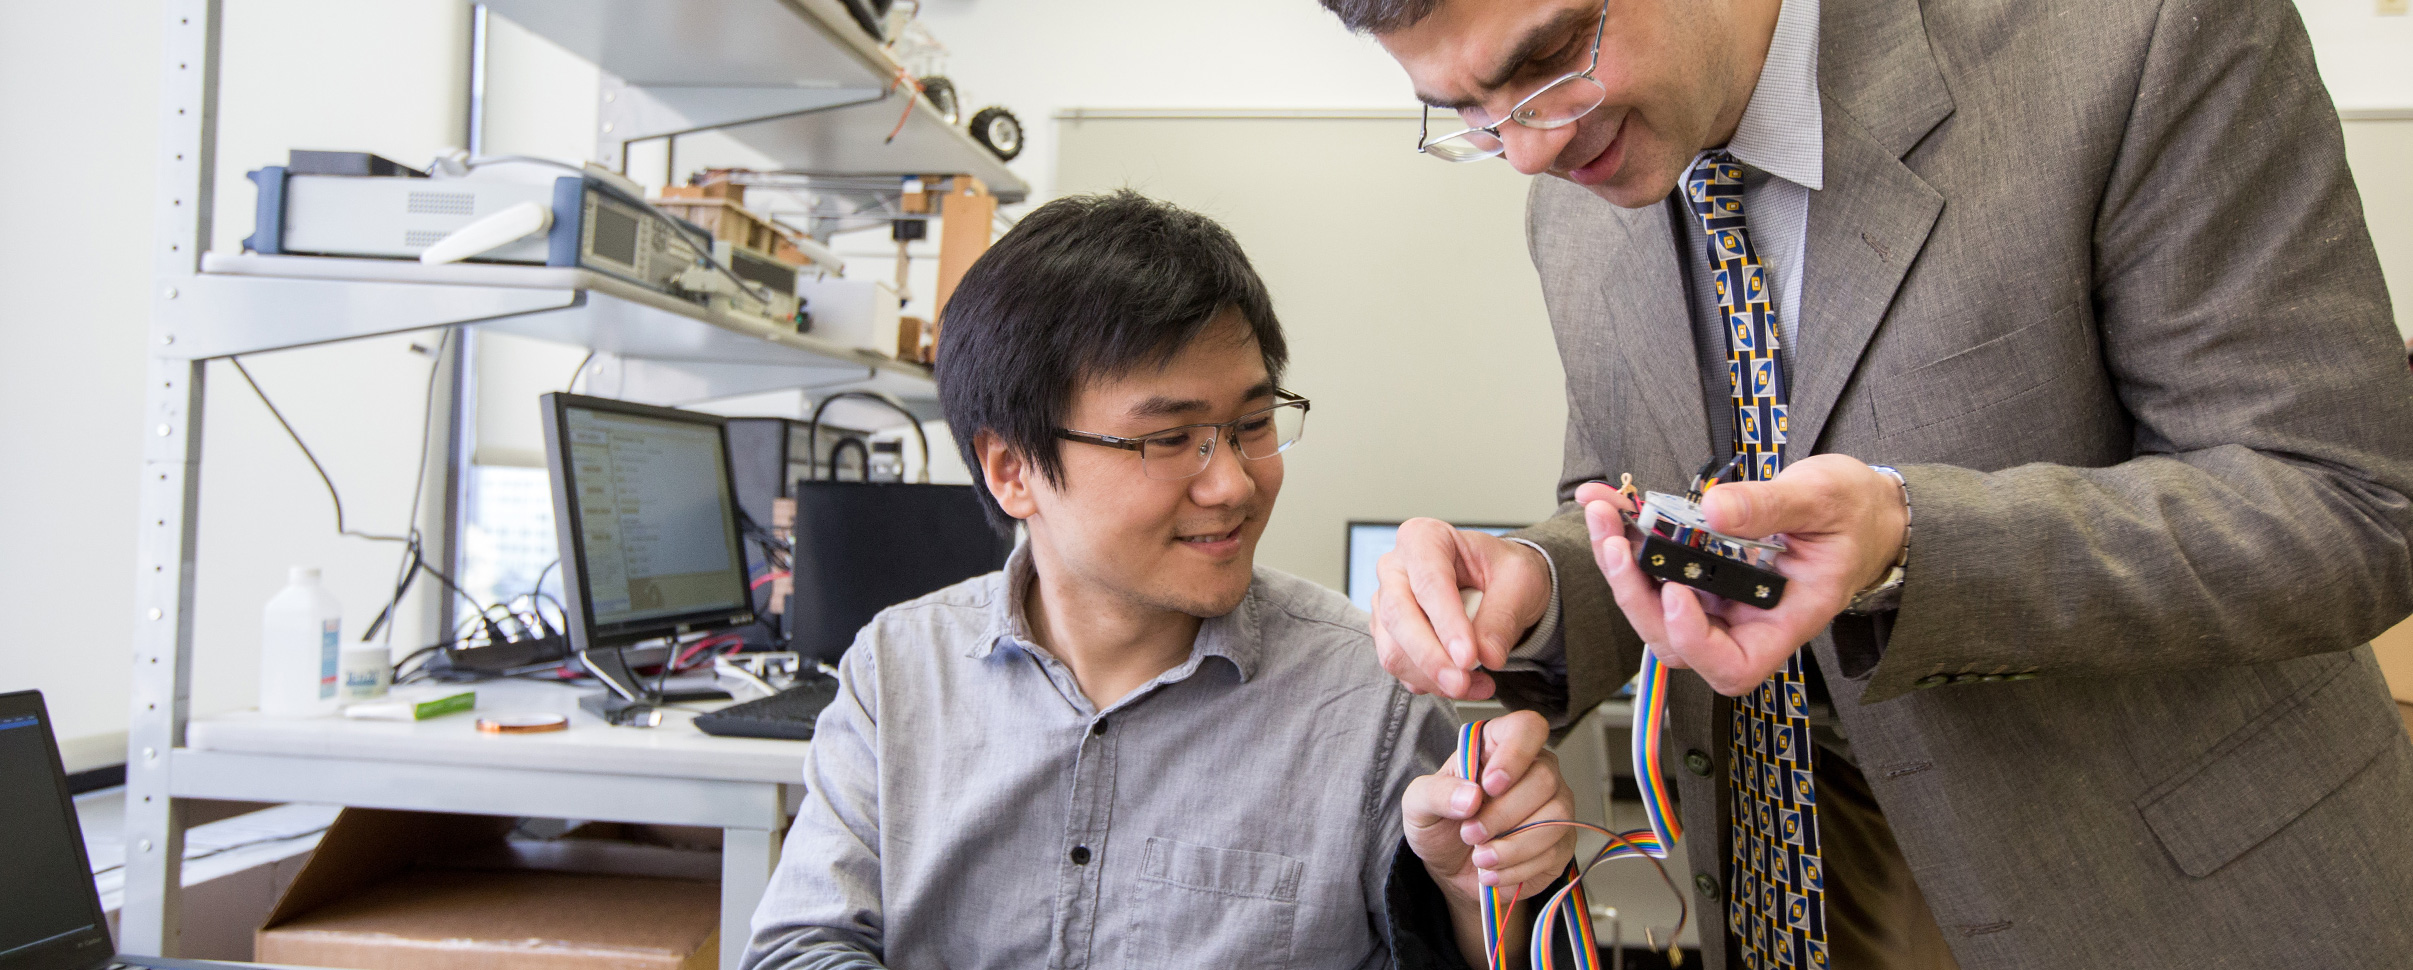 student and professor working on circuits